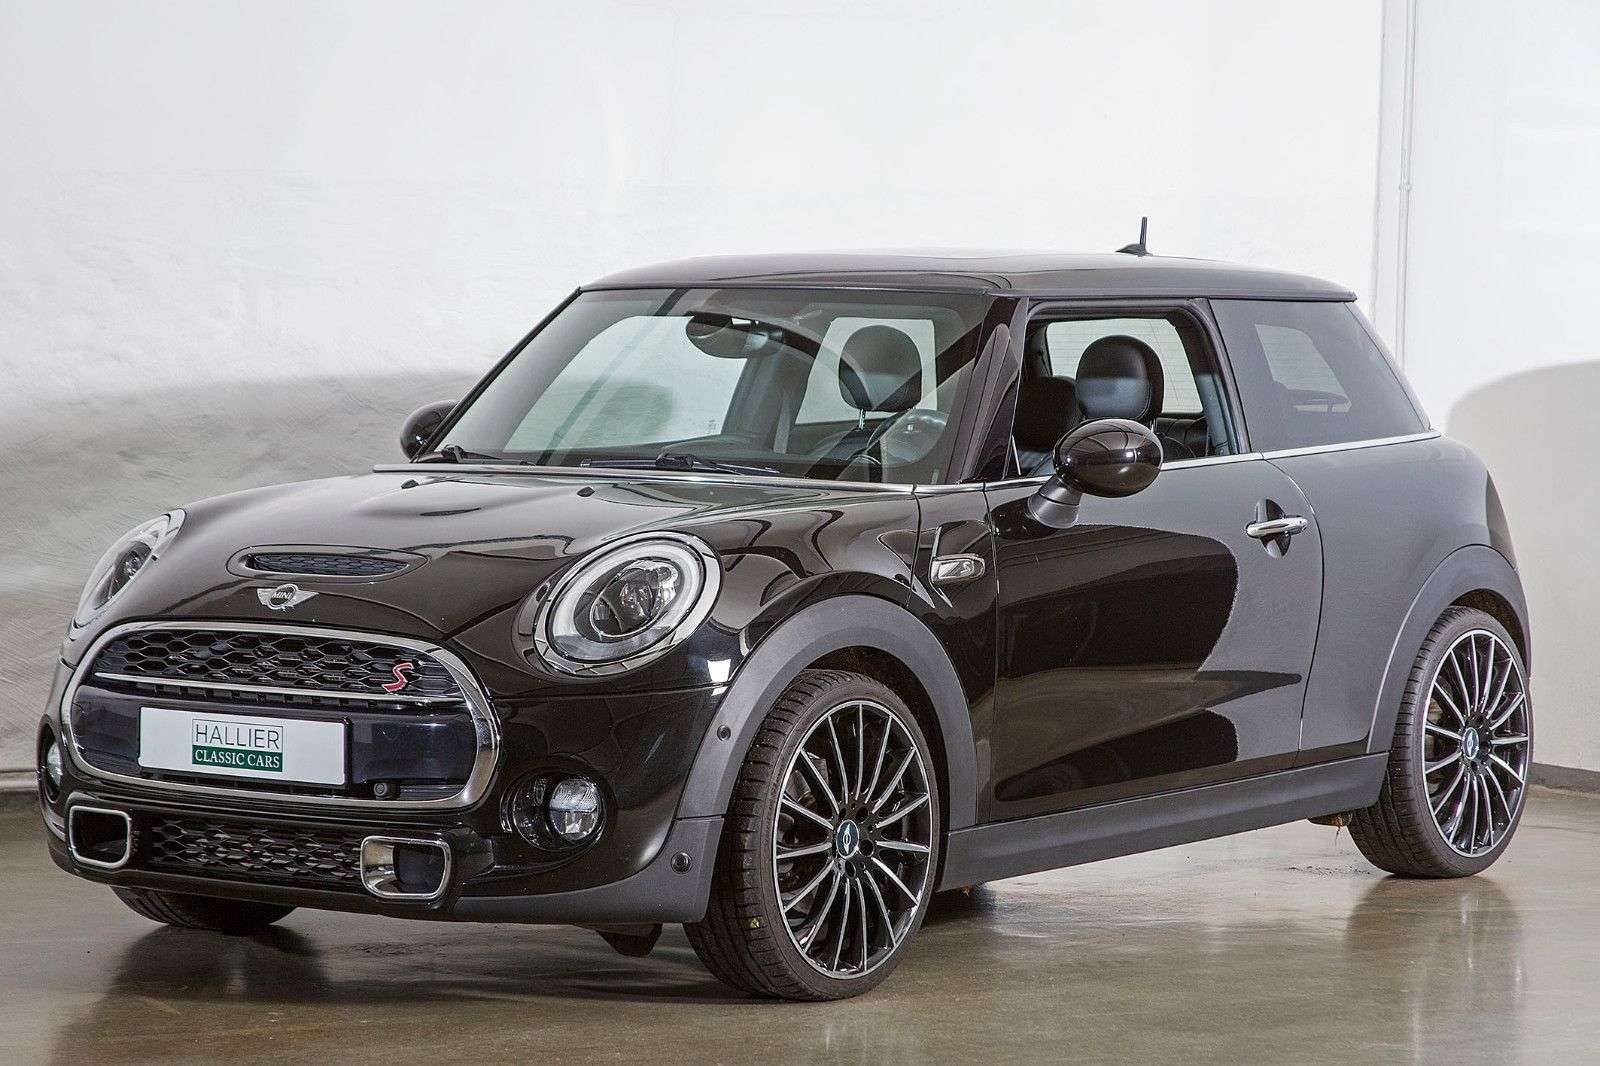 For Sale: Mini Cooper S Clubman (2016) offered for €19,900